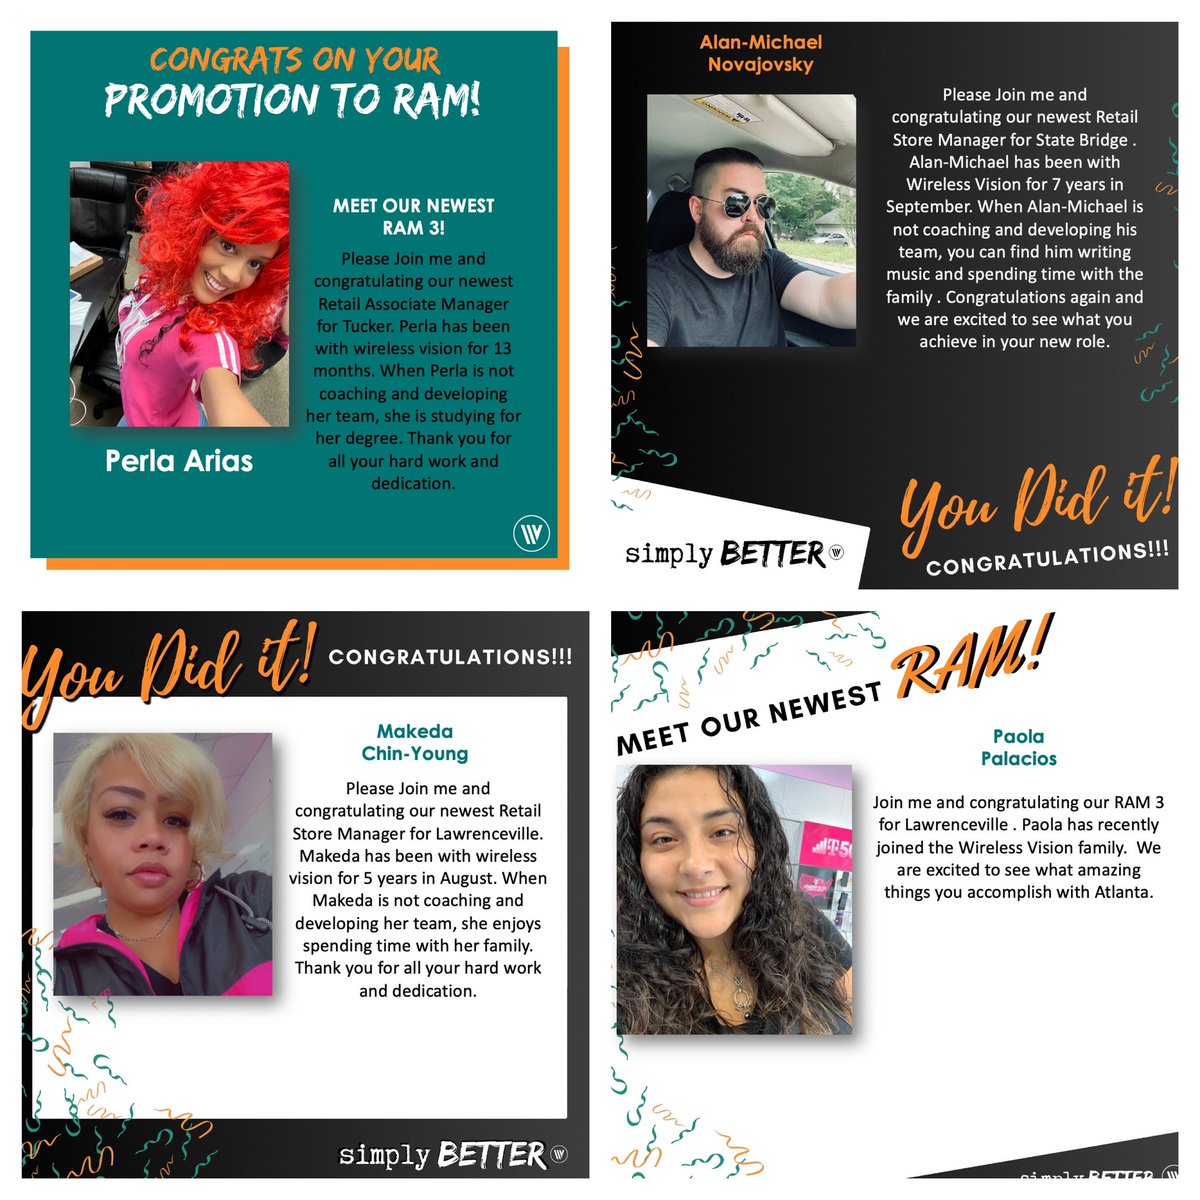 It’s an honor to announce our Newest Retail Store Manager Makeda Chin-Young and Alan-Michael Novajovsky!! 🥳🥳🥳 We also have our new RAM 3’s Perla Arias and Paola Palacios!! 🥳🥳🥳 #WVCulture #atlanta @WirelessVision